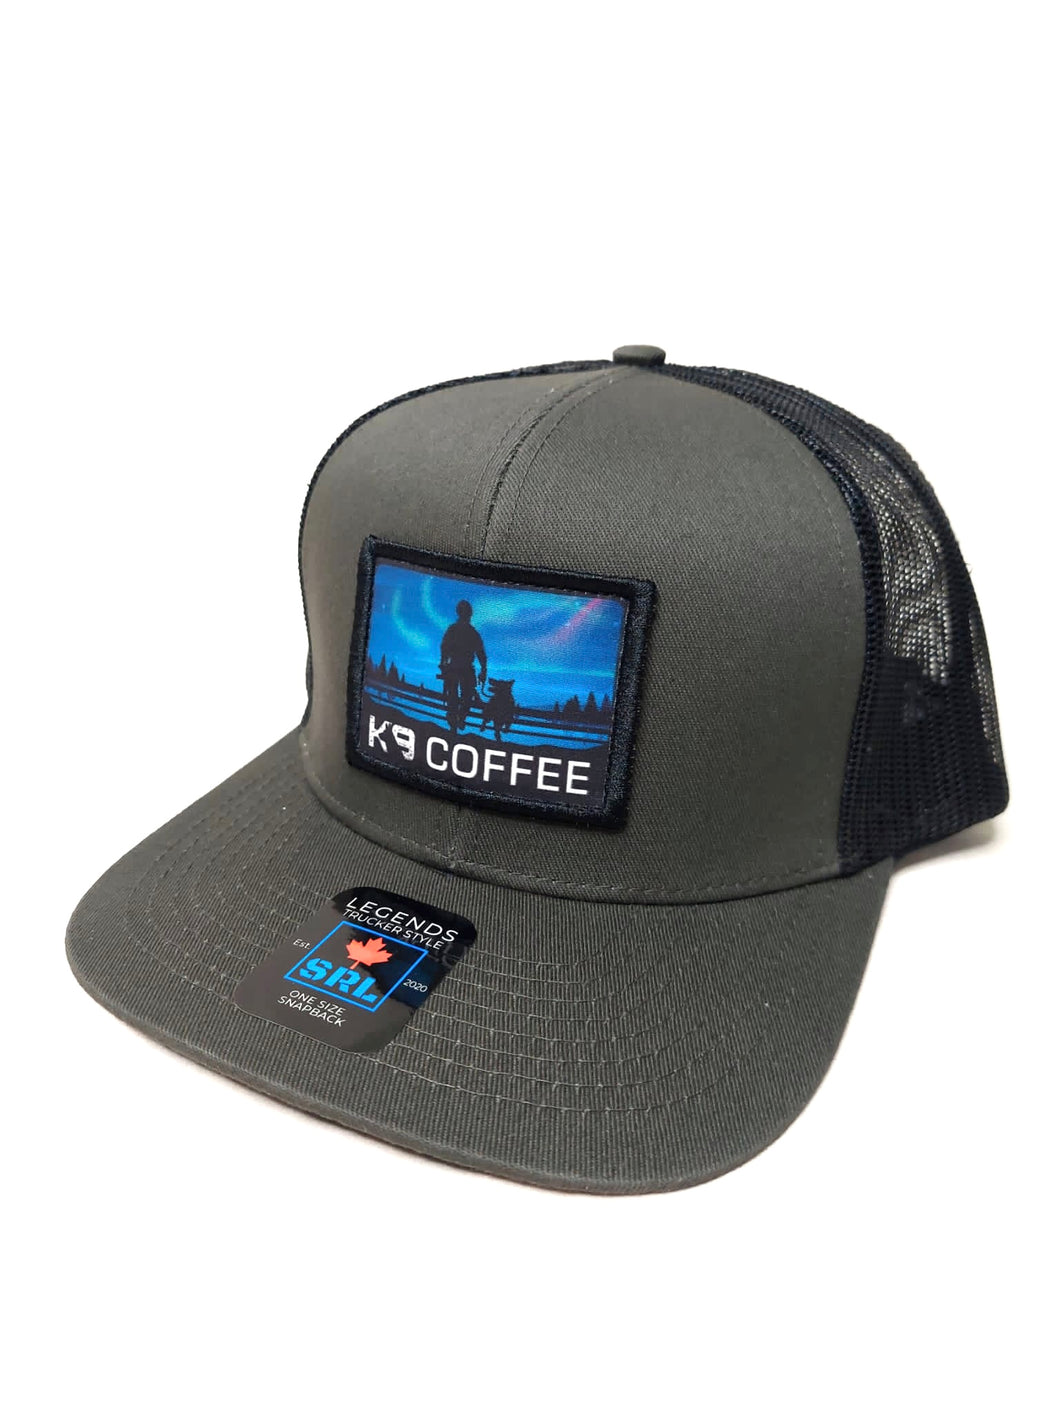 The Northern Legends K9 Coffee Snapback